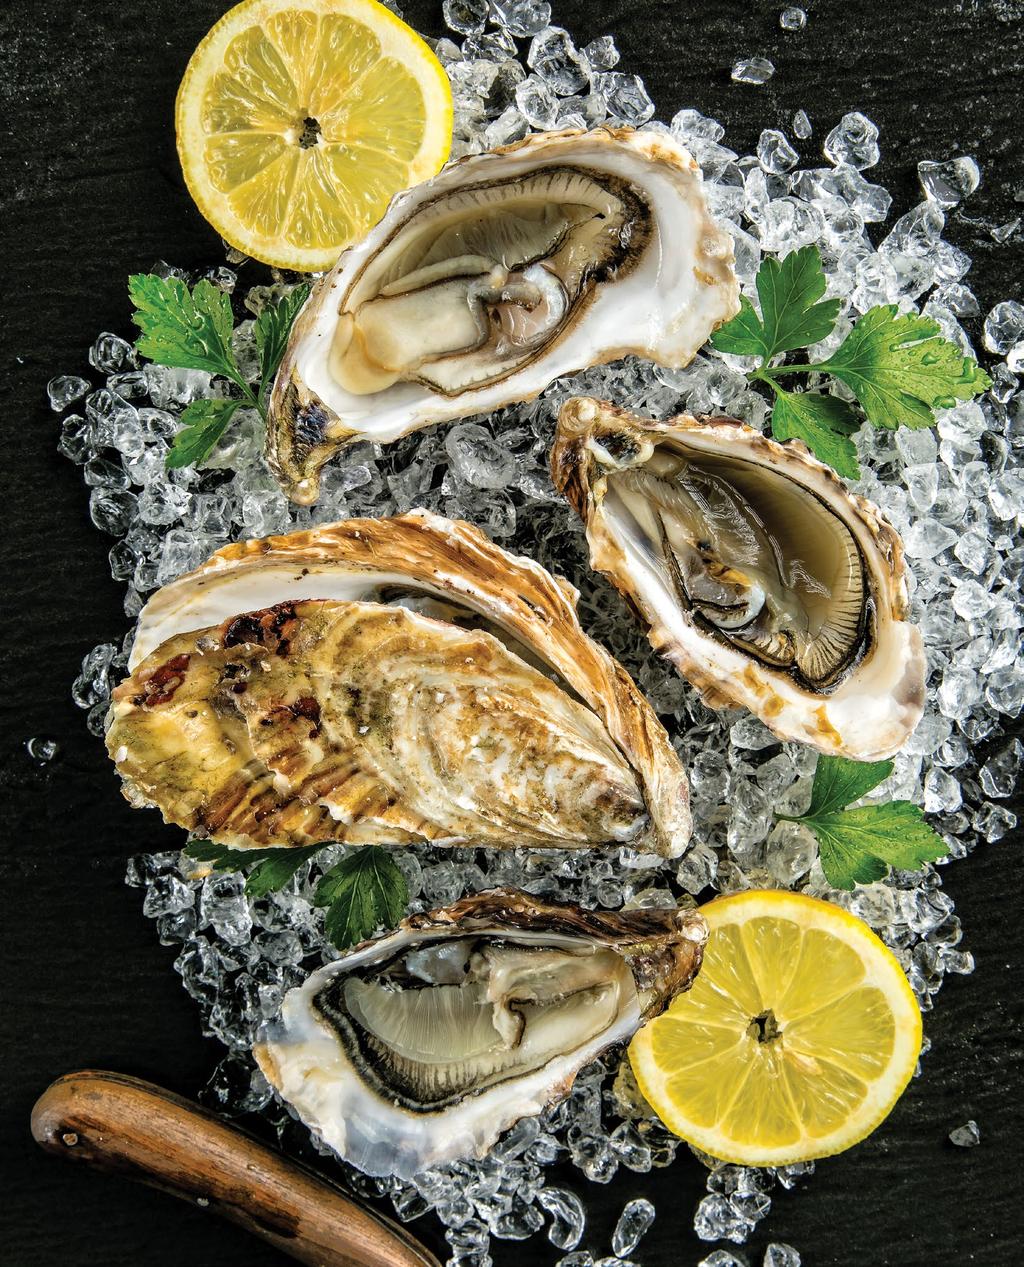 Optional Extras Prices are per person - served on platters CALAMARI FRITTI Served with fresh lemon $3.50 OYSTERS NATURAL Sydney rock oysters served with fresh lemon (1 per person) $3.